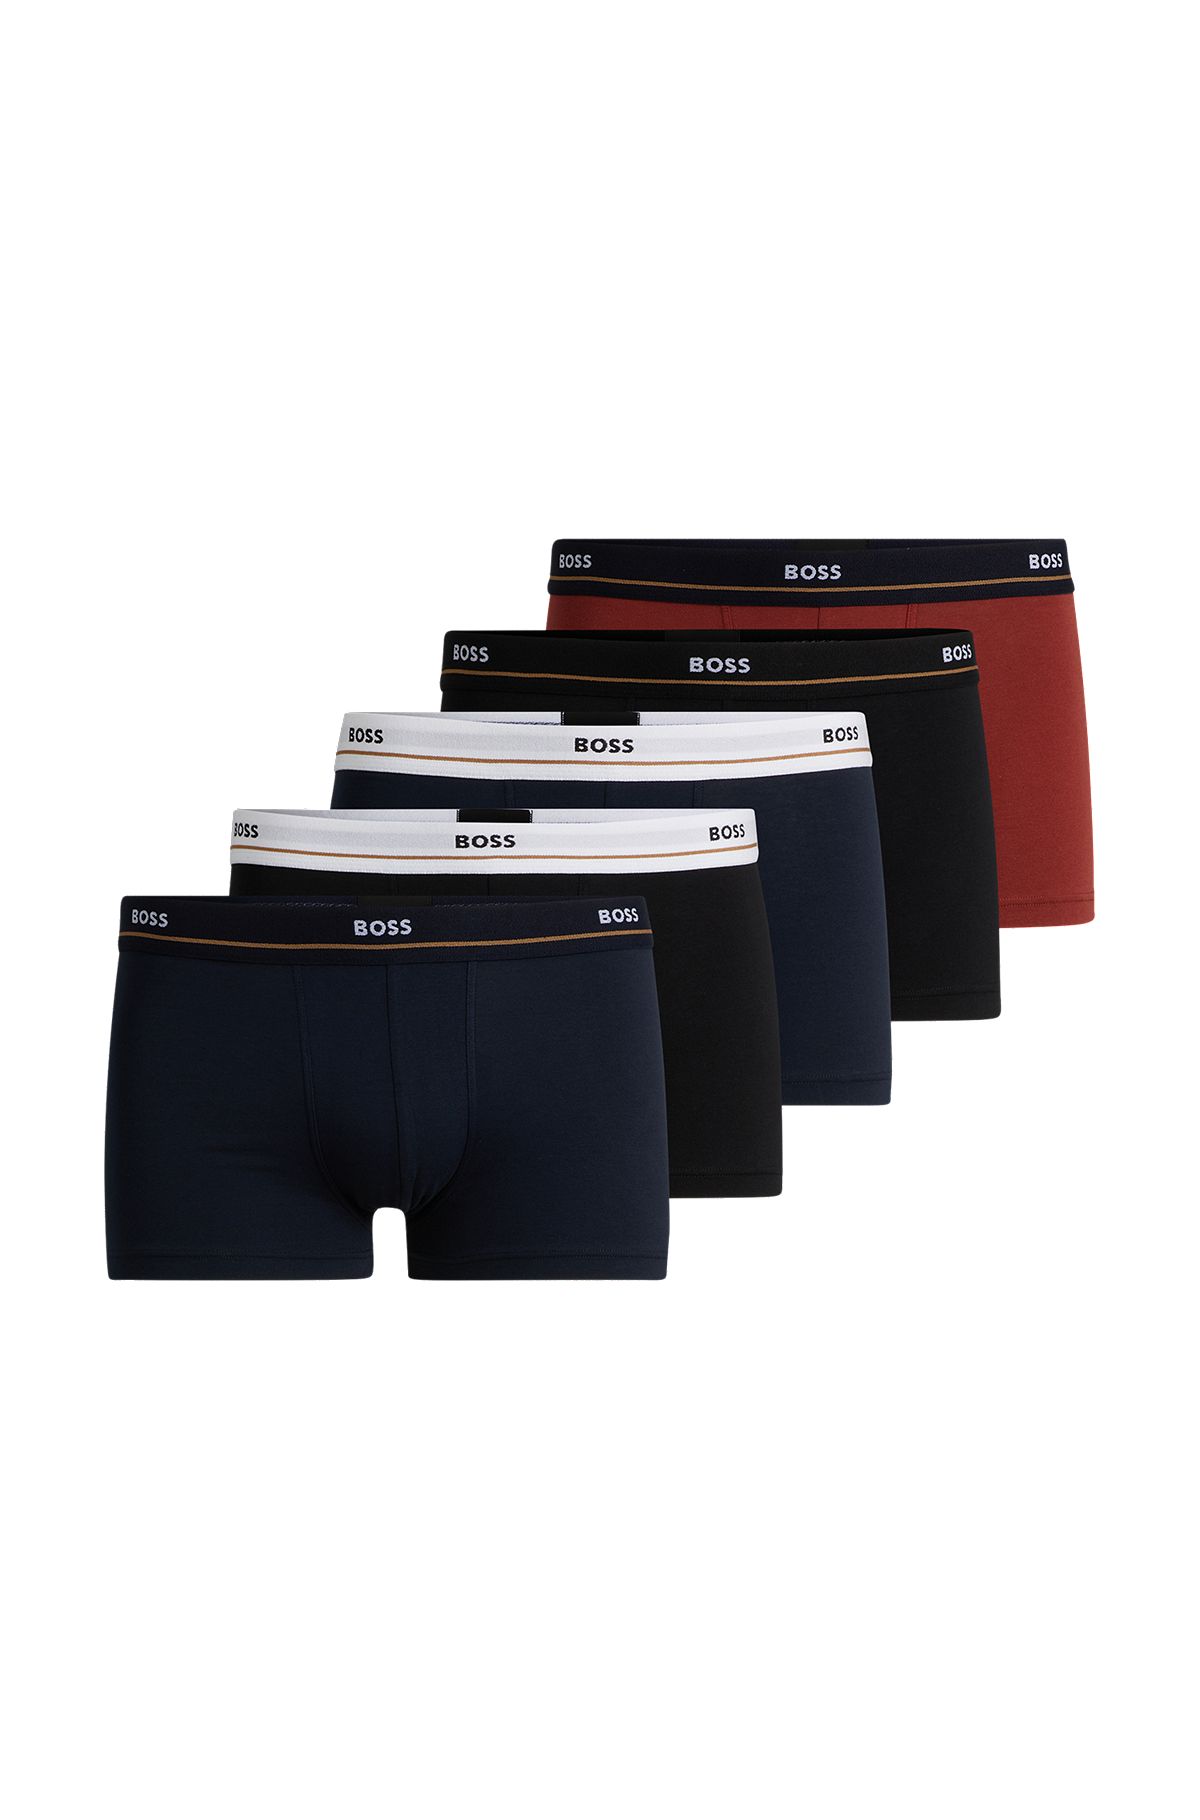  World's Best Boss Men's Stretch Boxer Briefs Breathable and  Soft Trunks Underwear : Sports & Outdoors